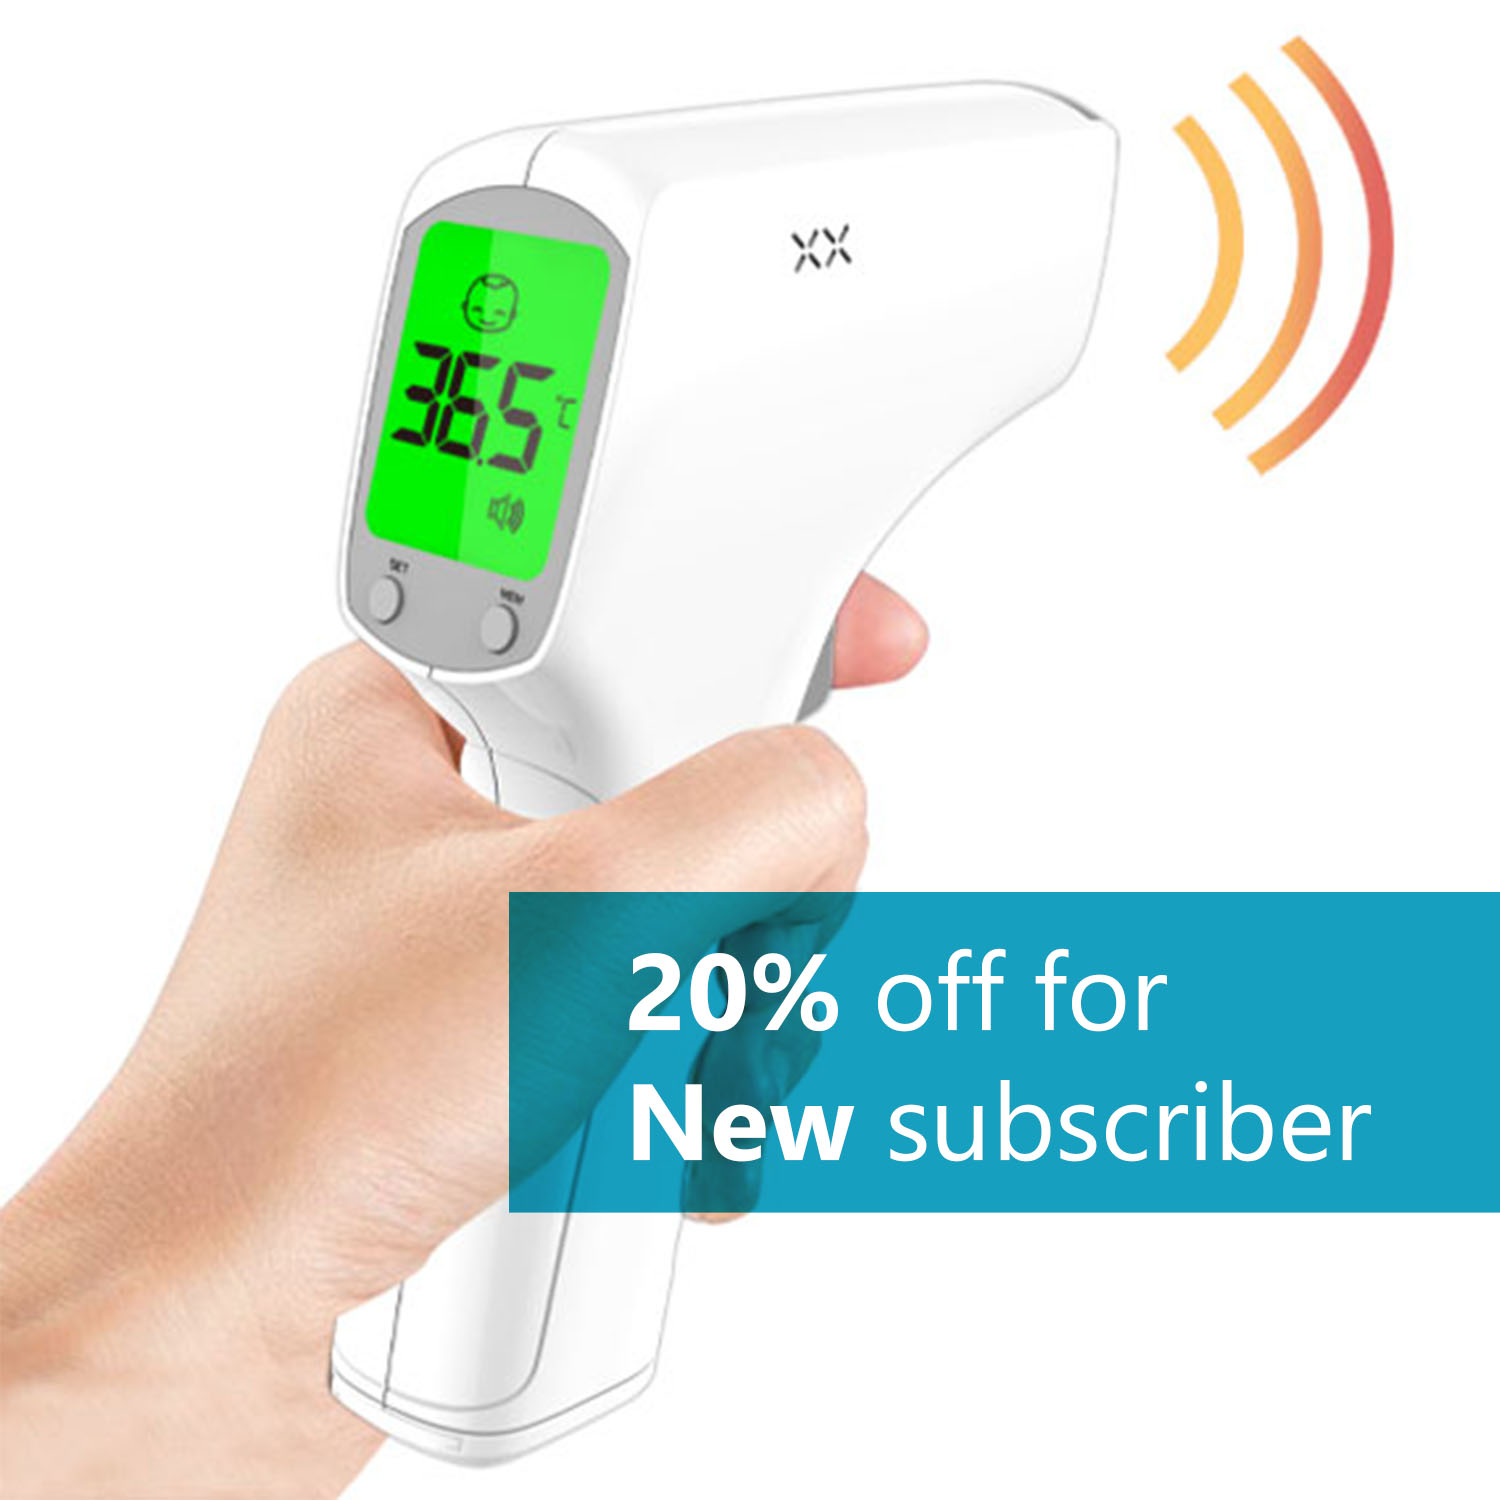 https://b-h-care.com/wp-content/uploads/2020/05/Infrared-Thermometer-bh-care-URN-103.jpg